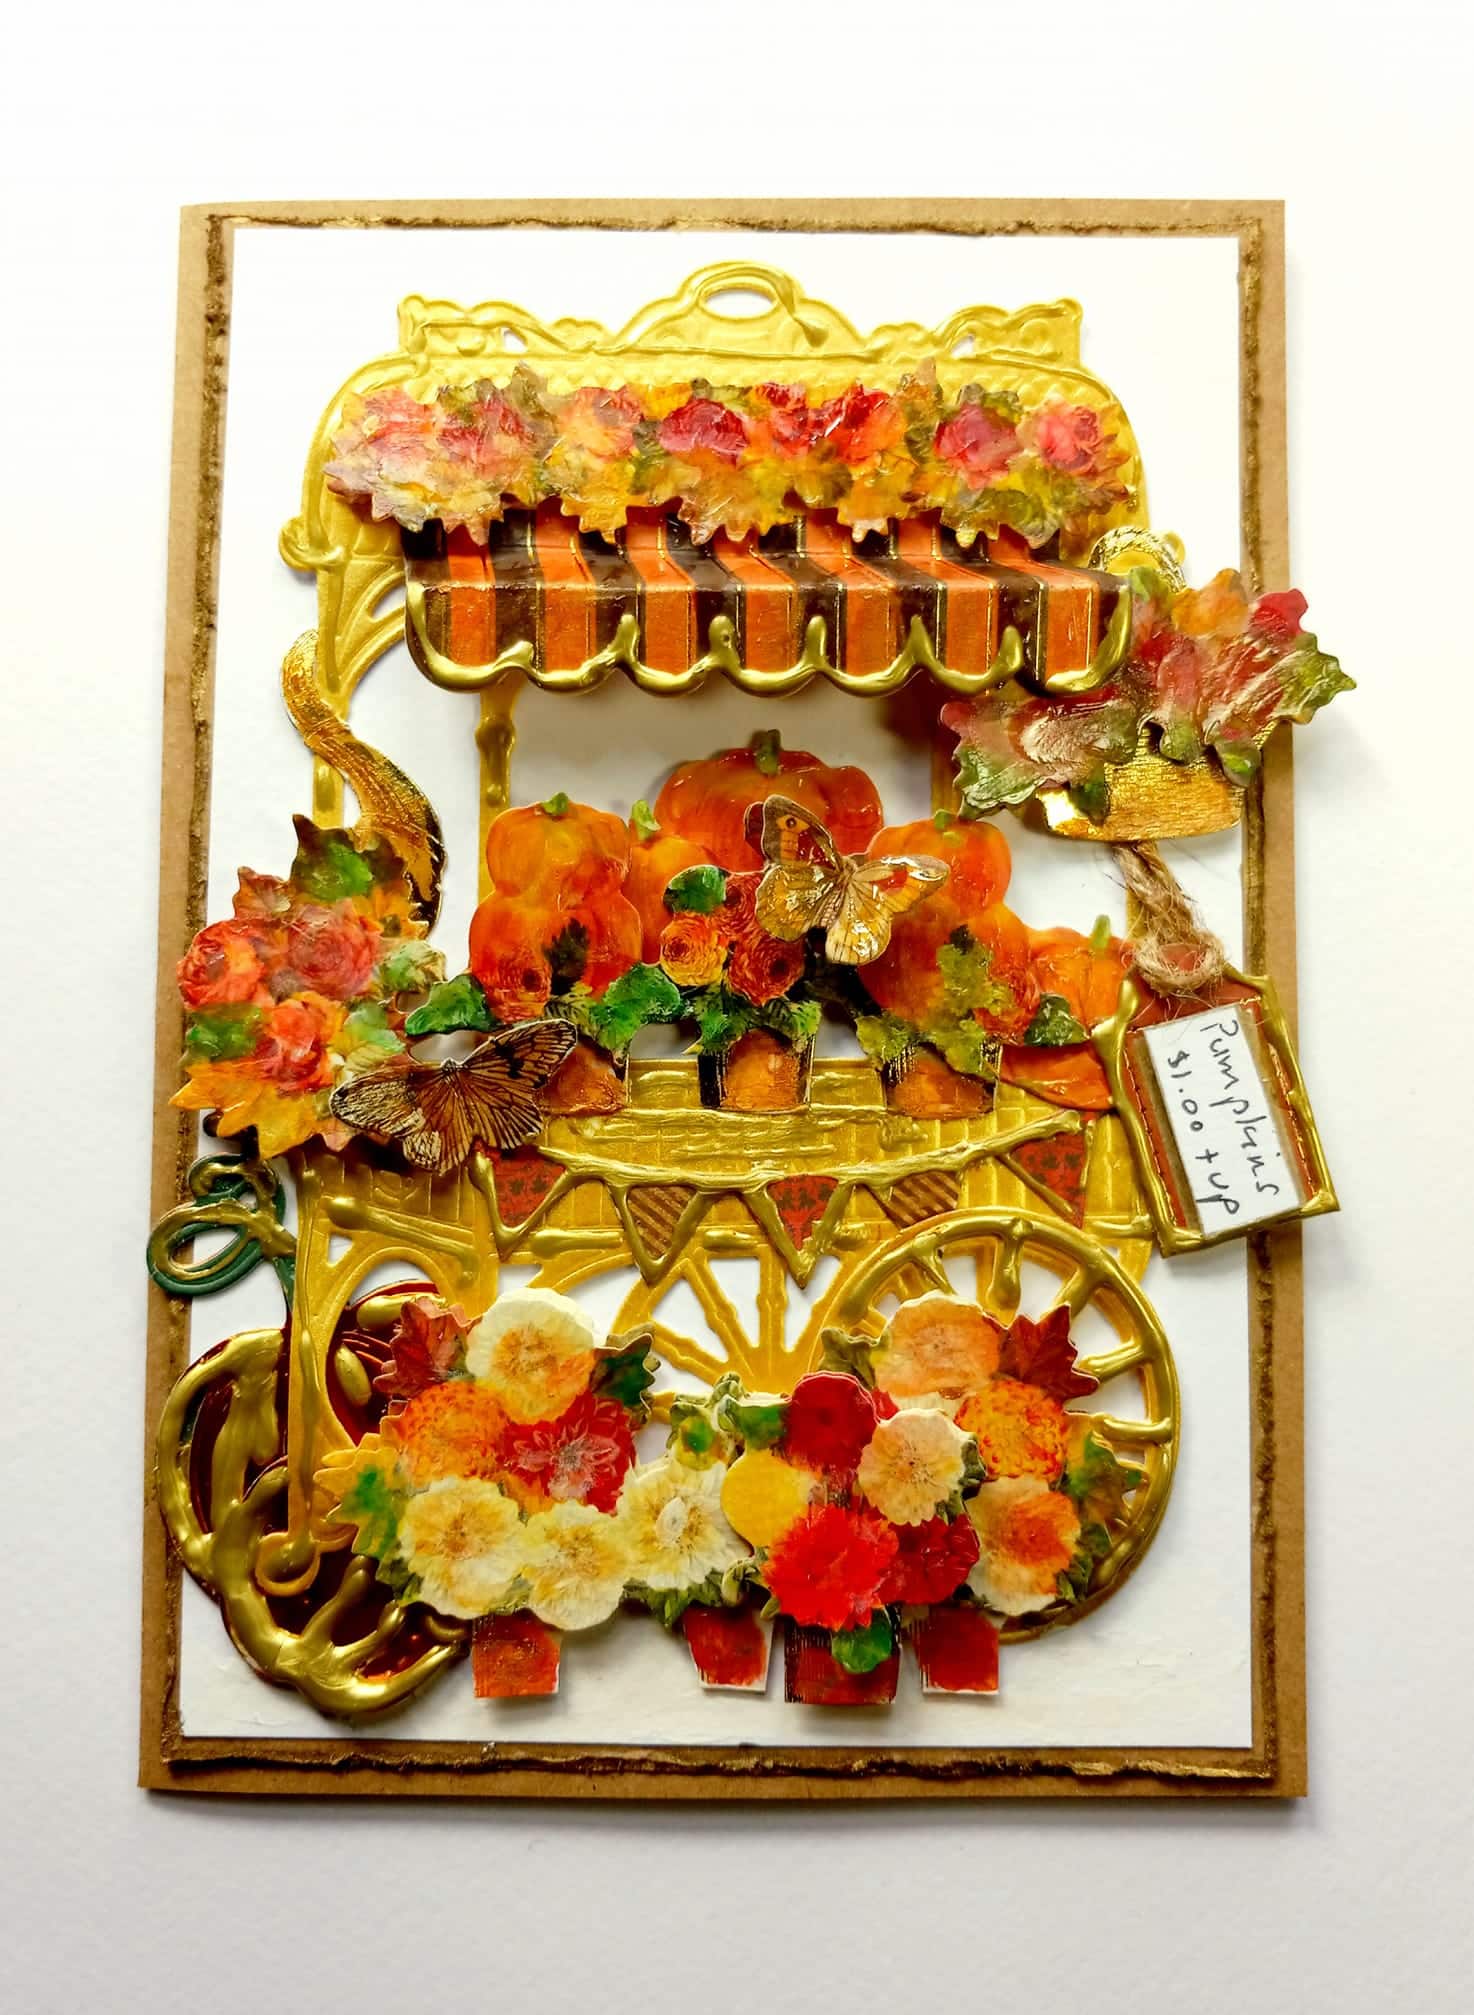 A card with a cart full of flowers and leaves.